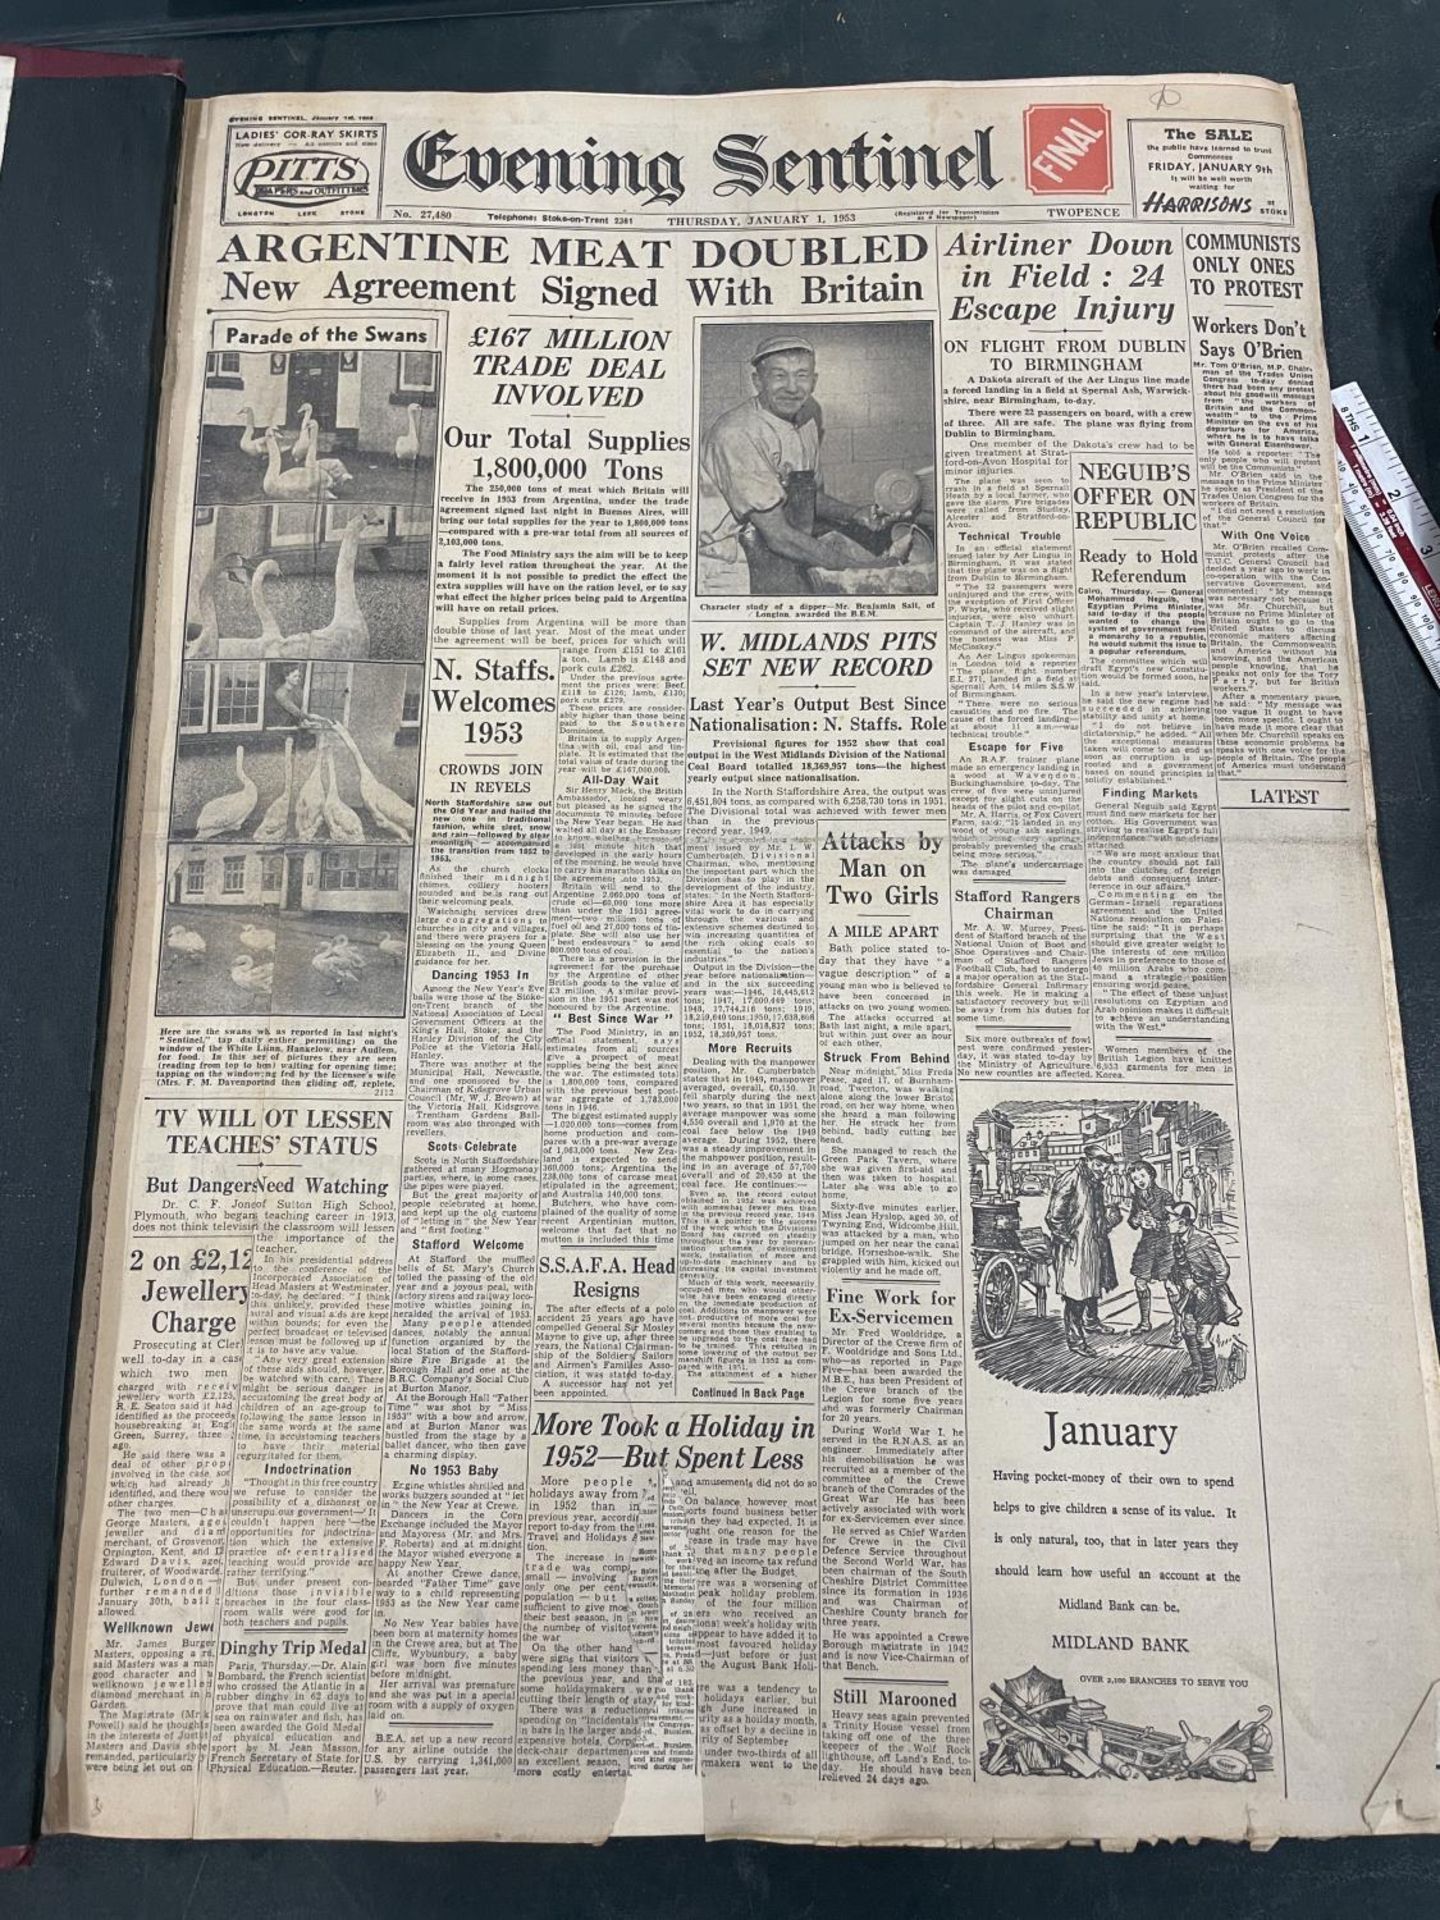 A LARGE BOOK CONTAINING ALL EDITIONS OF THE EVENING SENTINEL JAN 1 - 31 1953 - Image 4 of 8